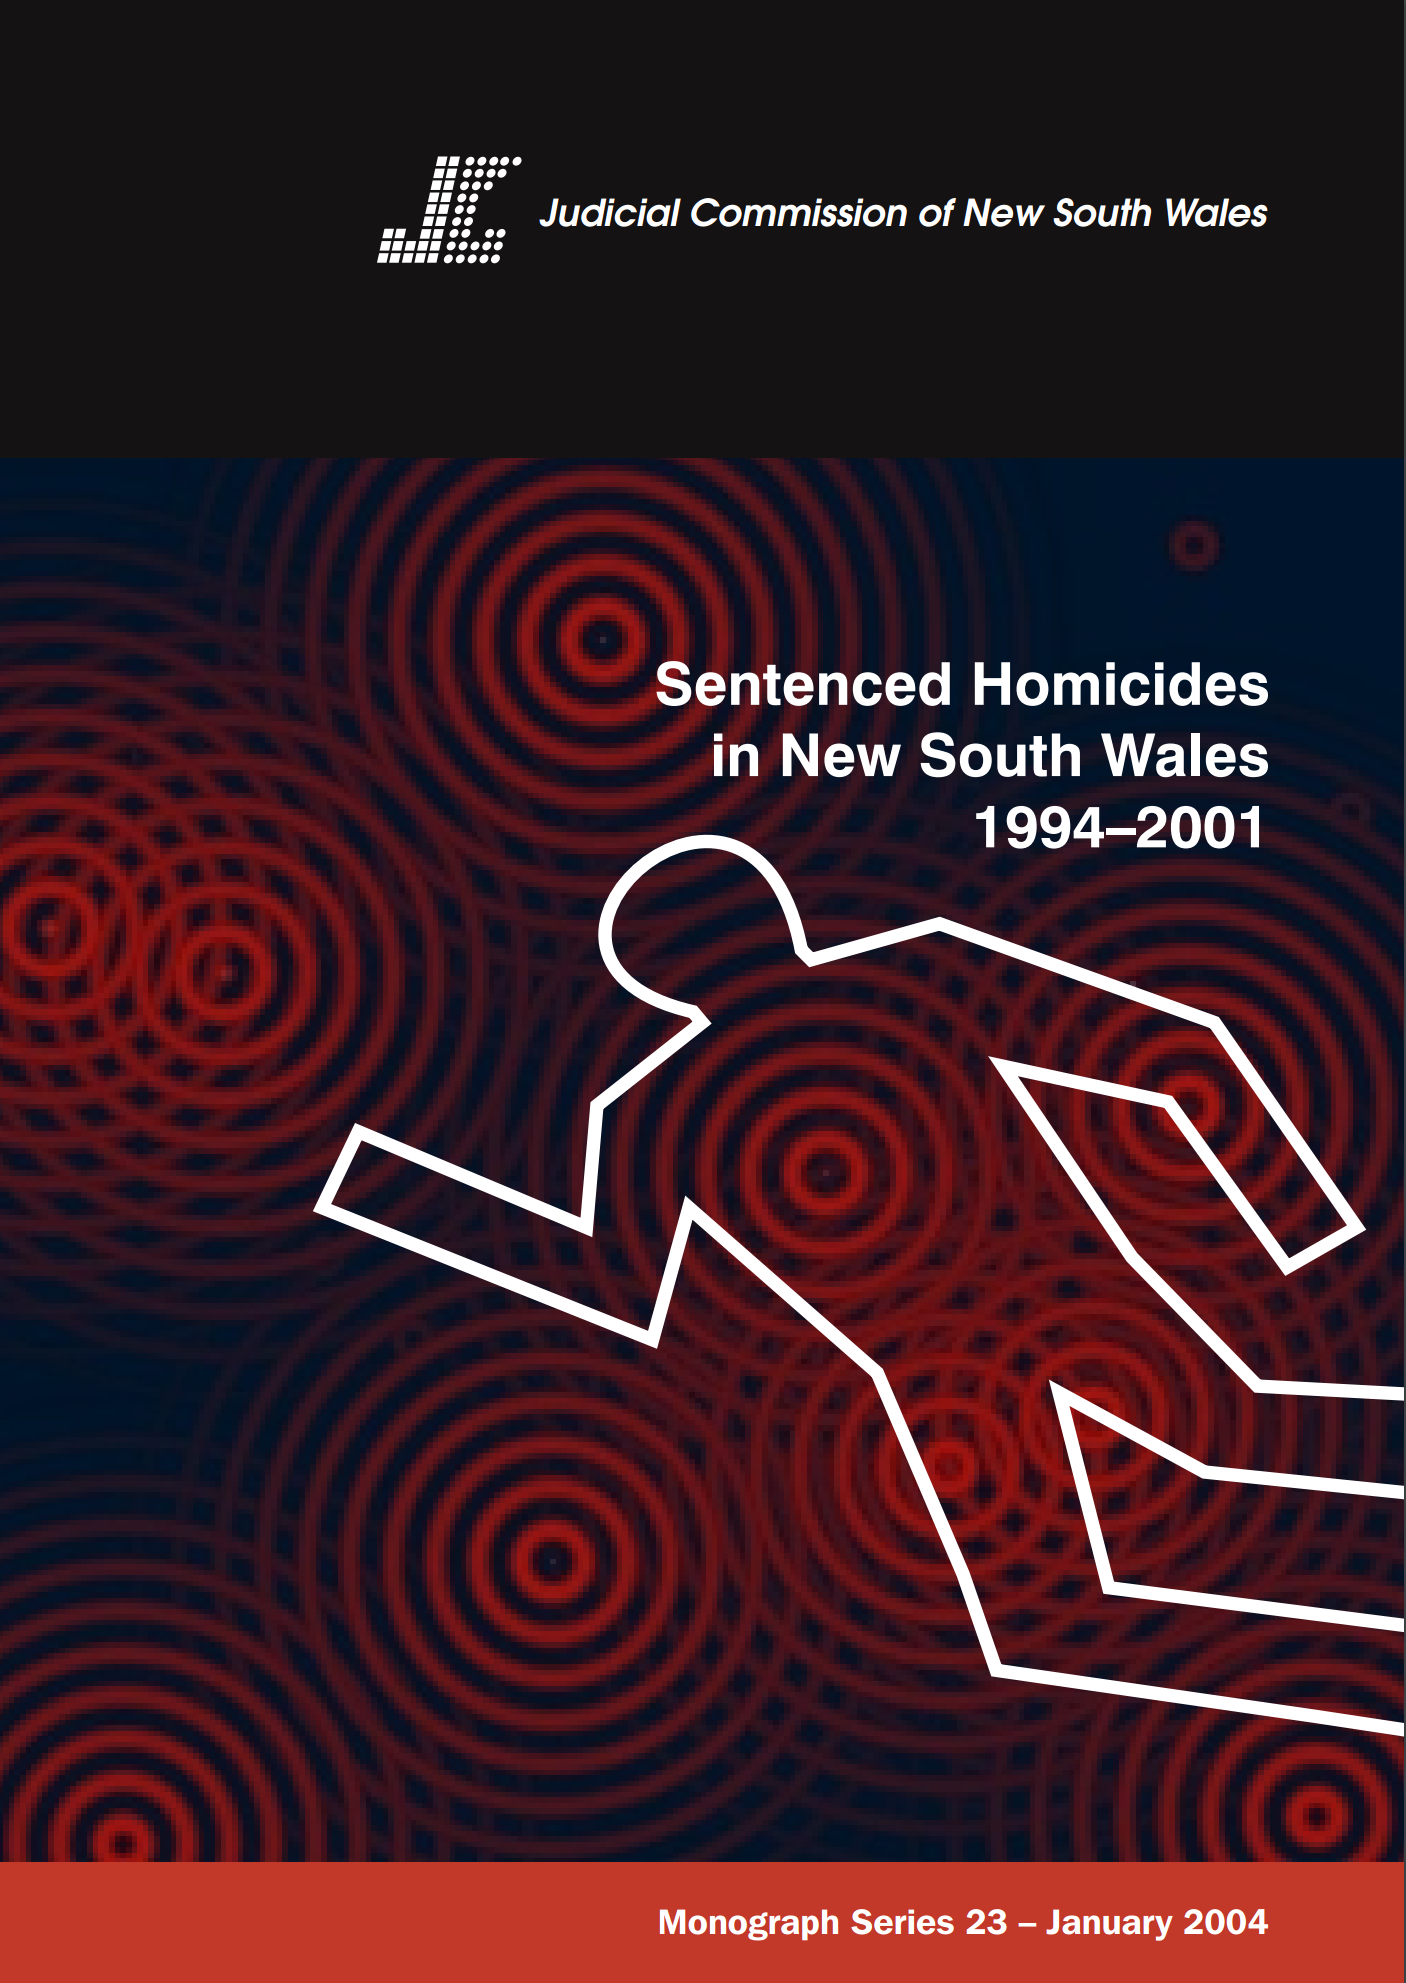 Research Monograph 23 Cover - Sentenced Homicides in New South Wales 1994-2001